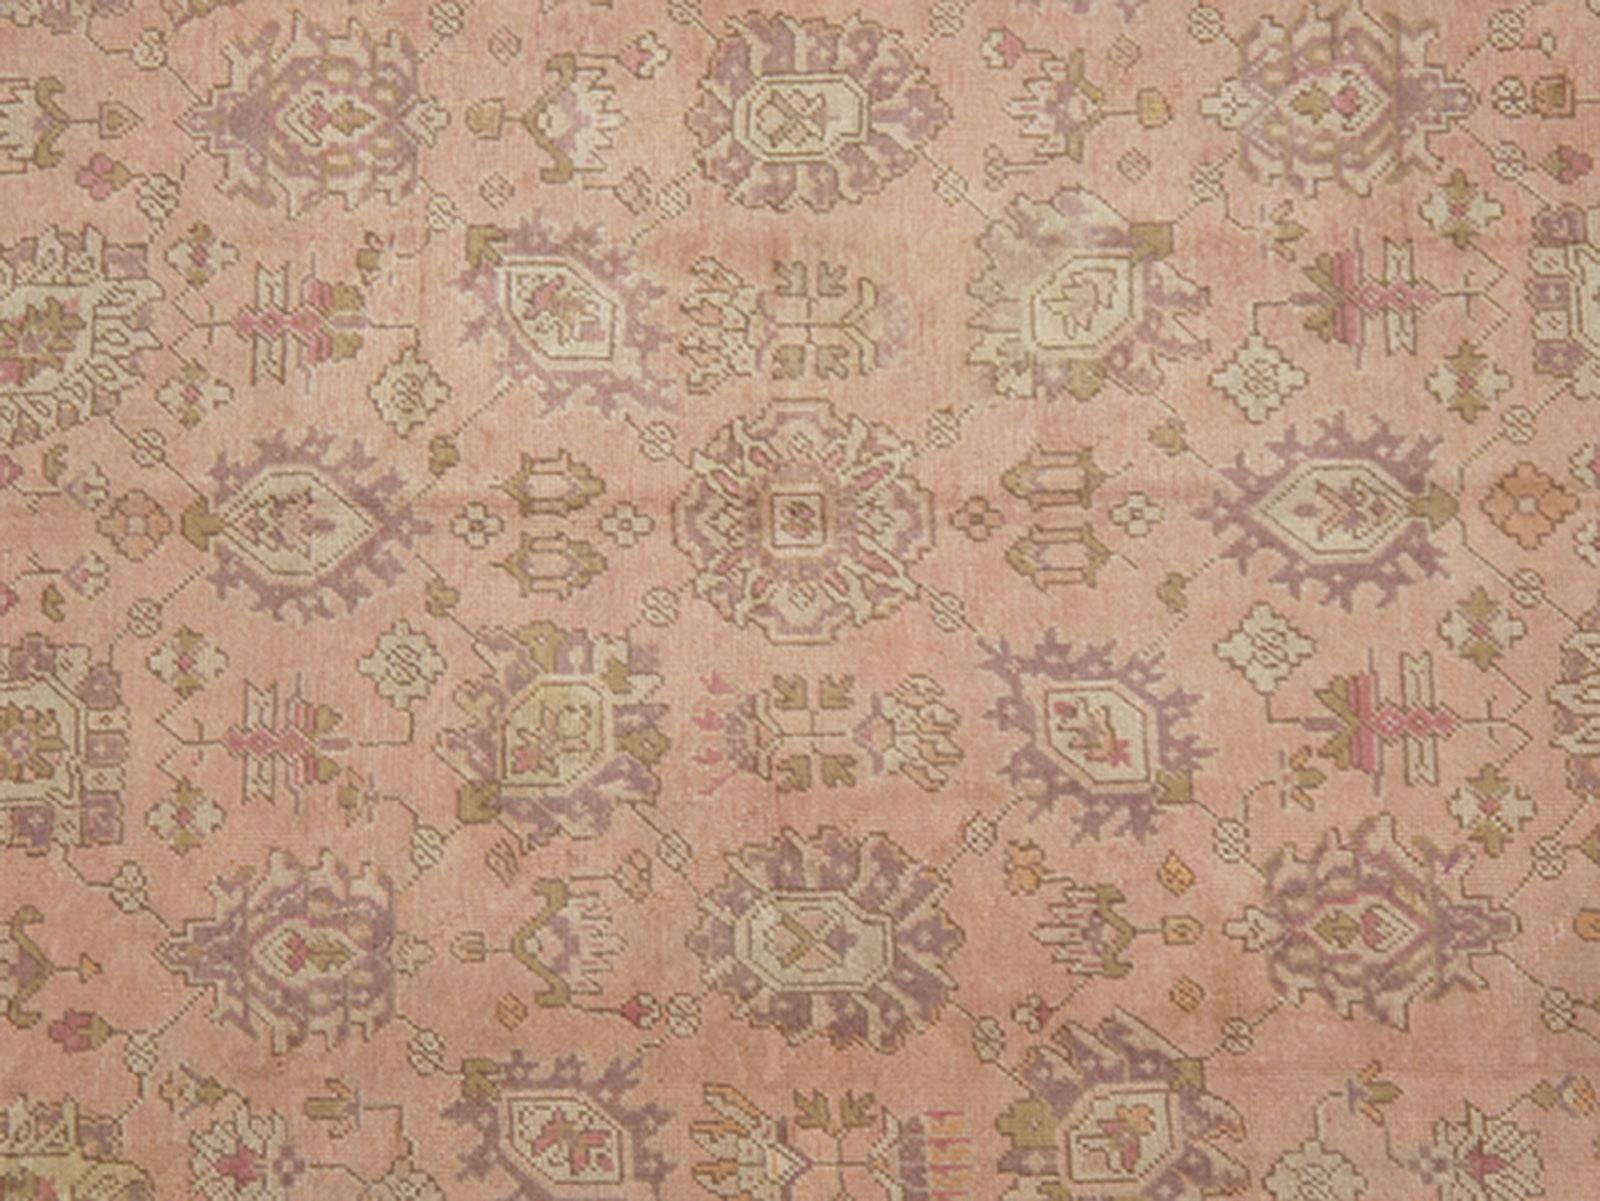 Hand-Knotted Antique Turkish Oushak Rug with Floral Motifs in Lavender, Coral-Pink, and Green For Sale